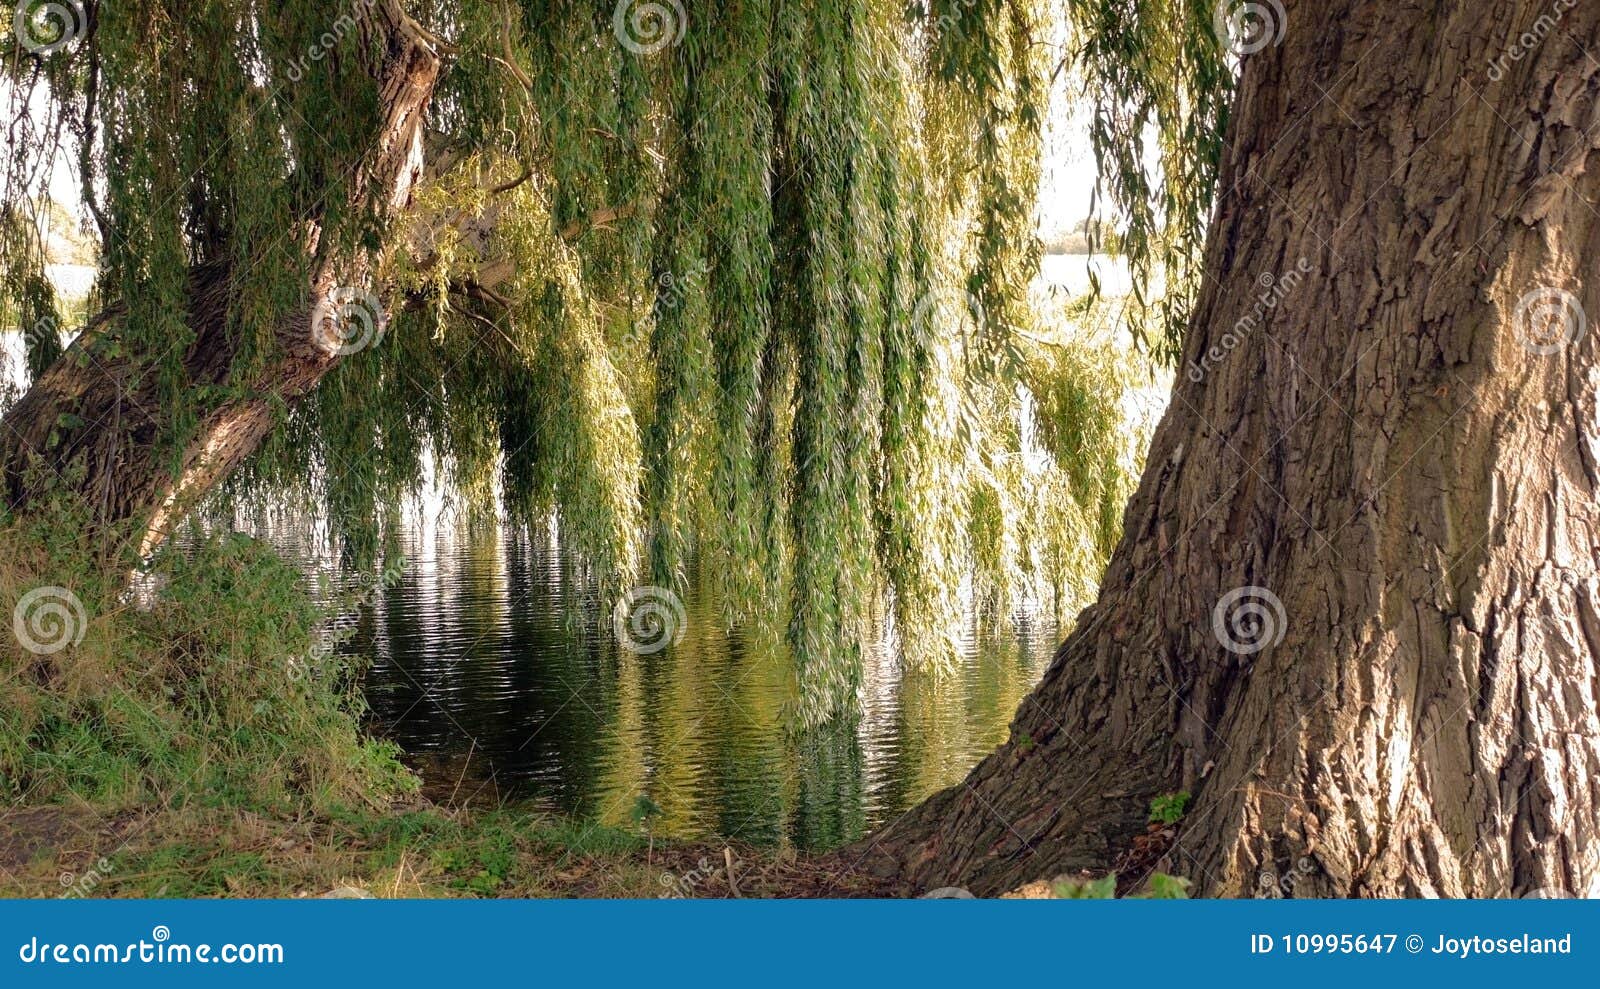 willows-by-water-stock-image-image-of-landscape-sunshine-10995647